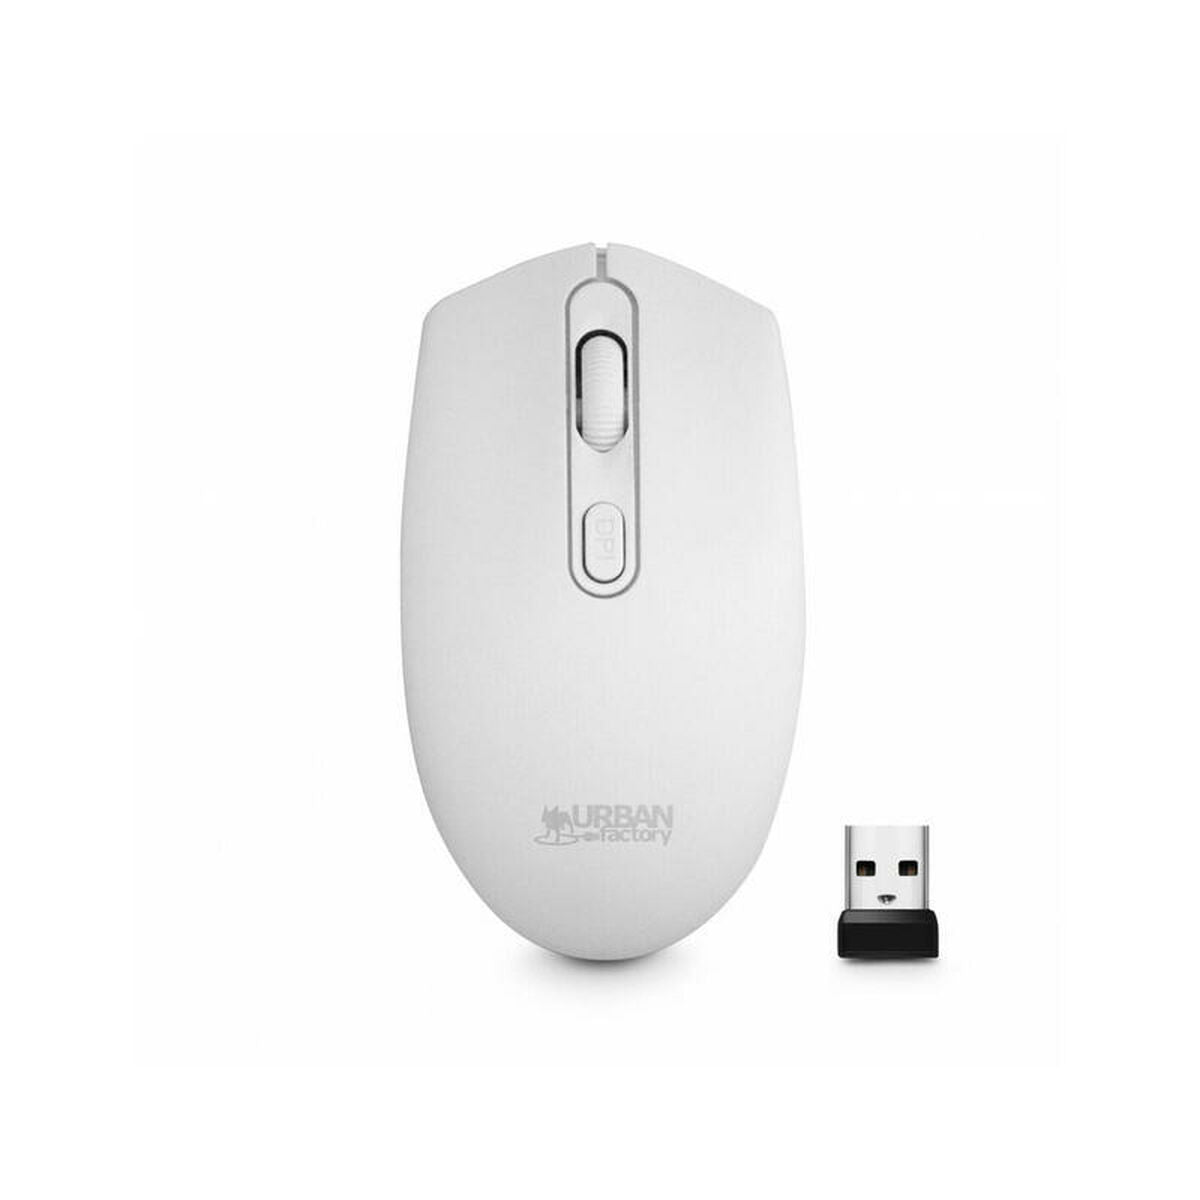 Wireless Mouse Urban Factory FCM02UF White 1600 dpi, Urban Factory, Computing, Accessories, wireless-mouse-urban-factory-fcm02uf-white-1600-dpi, Brand_Urban Factory, category-reference-2609, category-reference-2642, category-reference-2656, category-reference-t-19685, category-reference-t-19908, category-reference-t-21353, category-reference-t-25626, computers / peripherals, Condition_NEW, office, Price_20 - 50, Teleworking, RiotNook